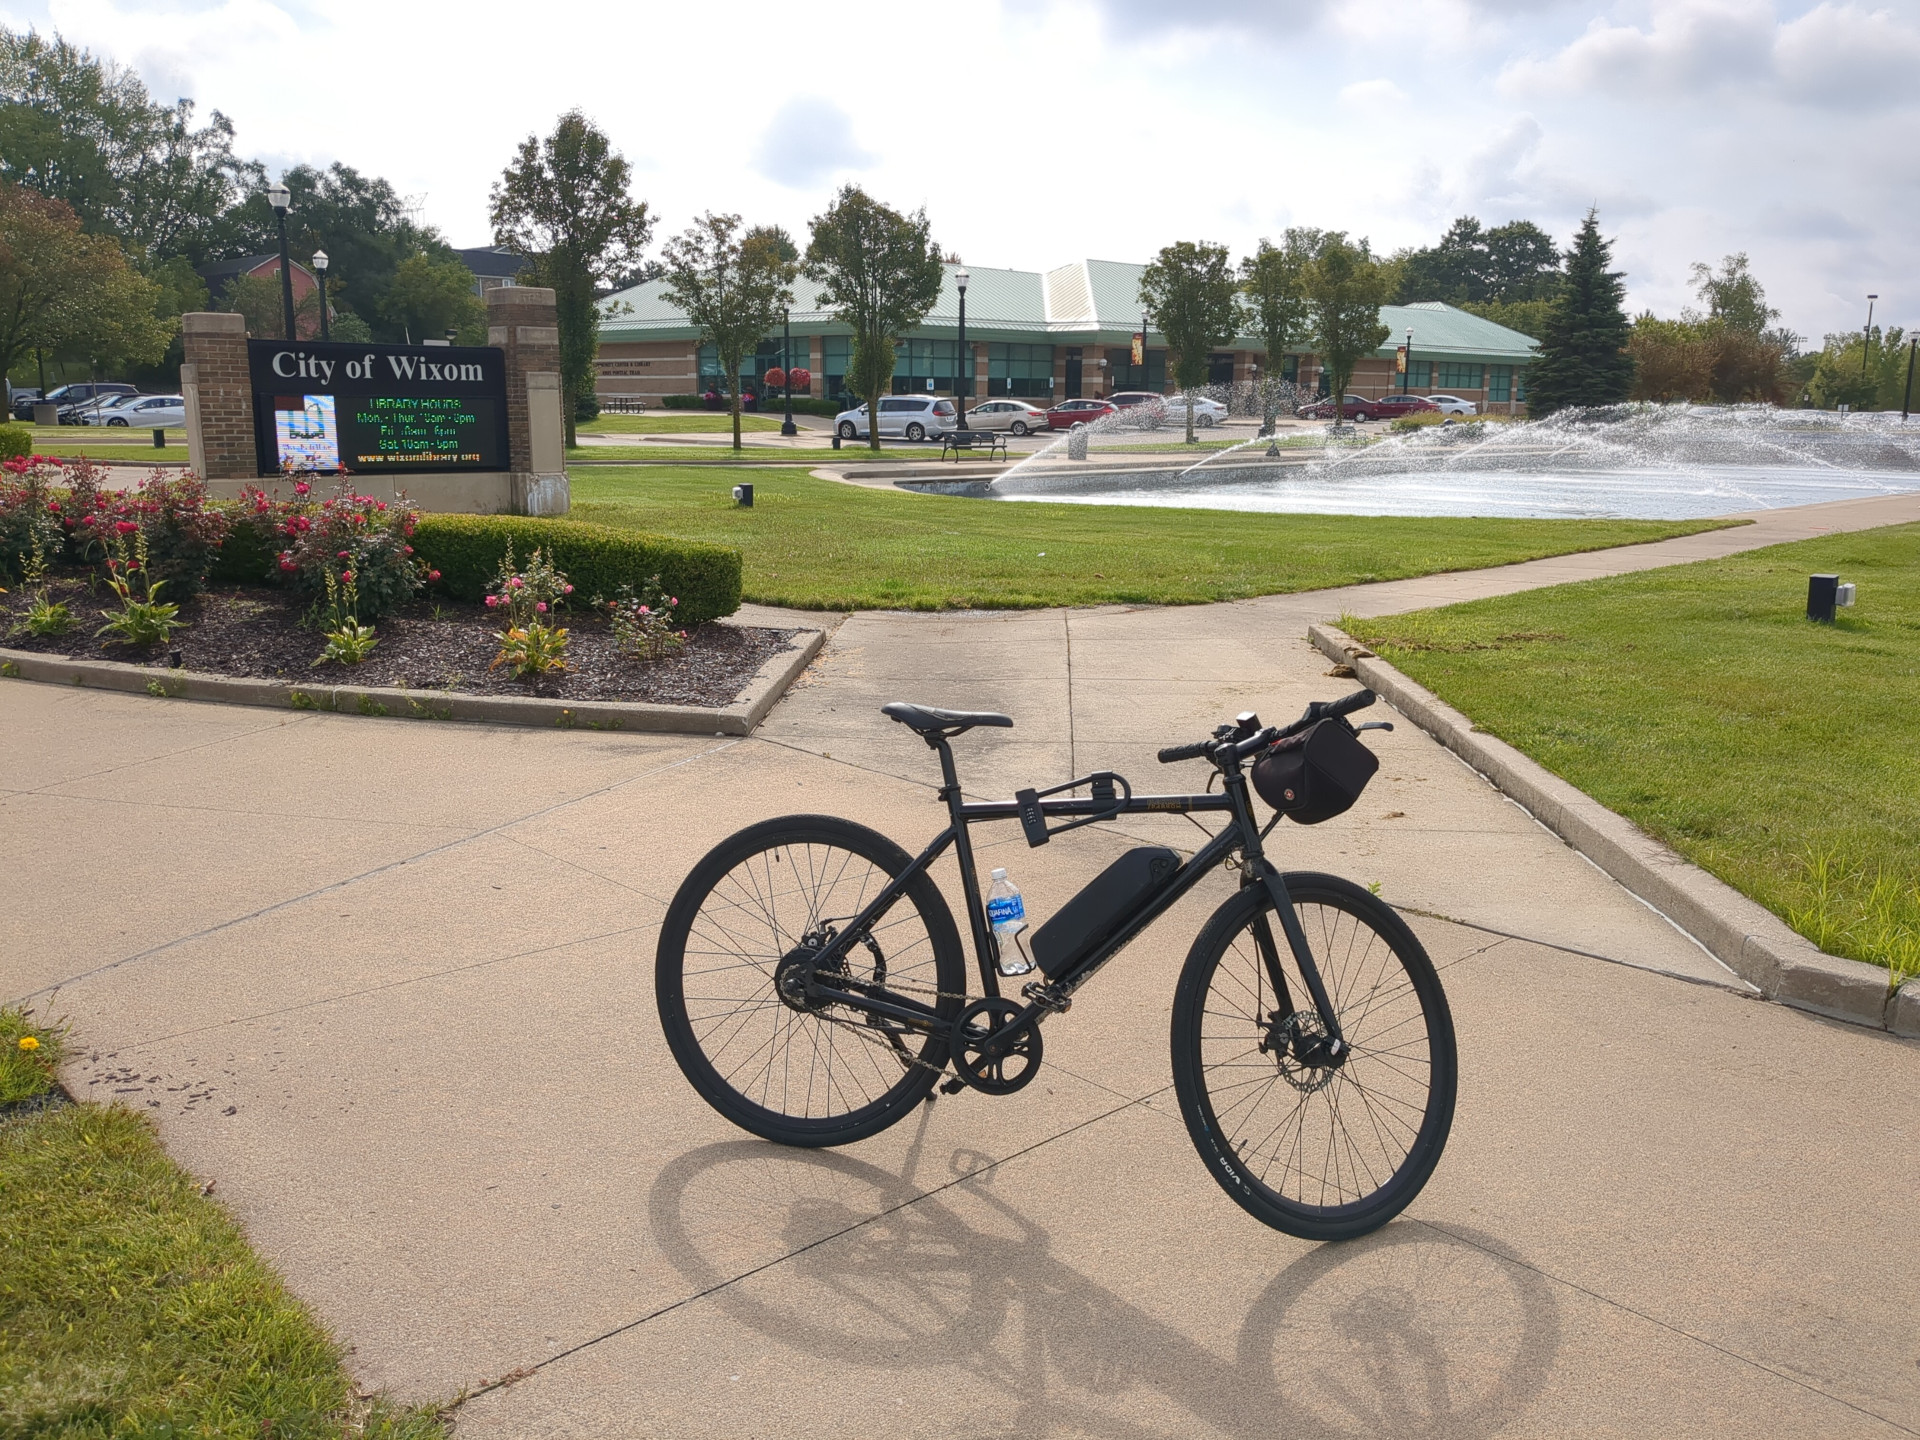 My bike sits in front of a fountain in front of the Wixom Public Library